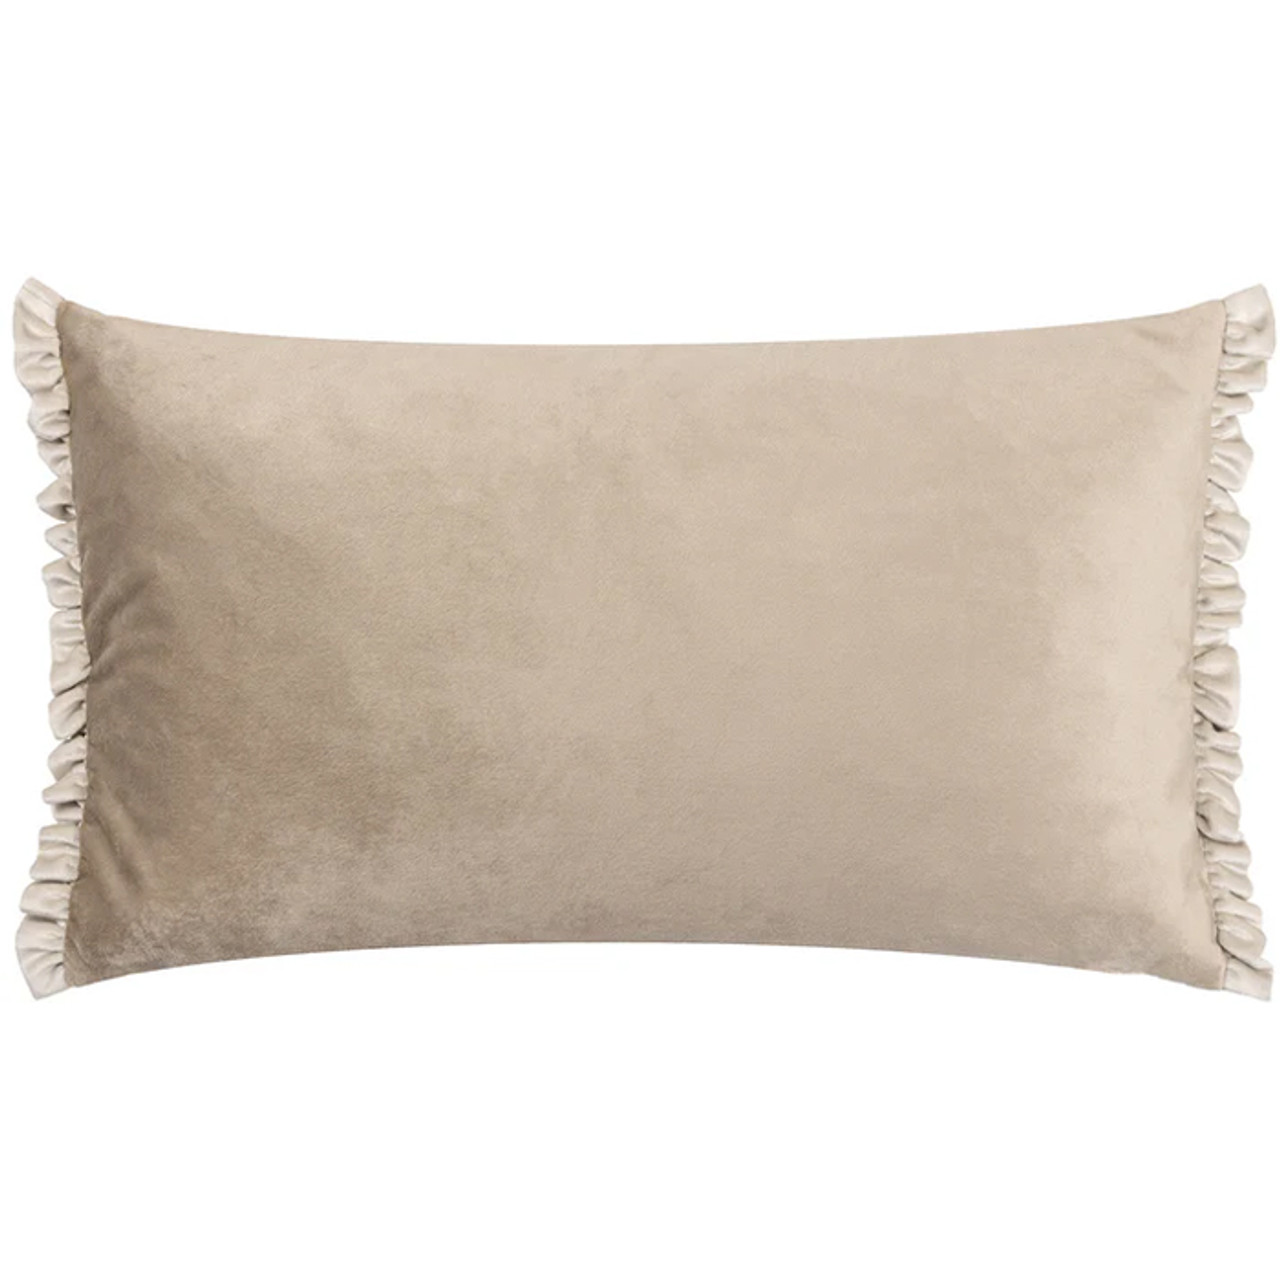 Tilly Cushion Oyster/Lace 30x50cm